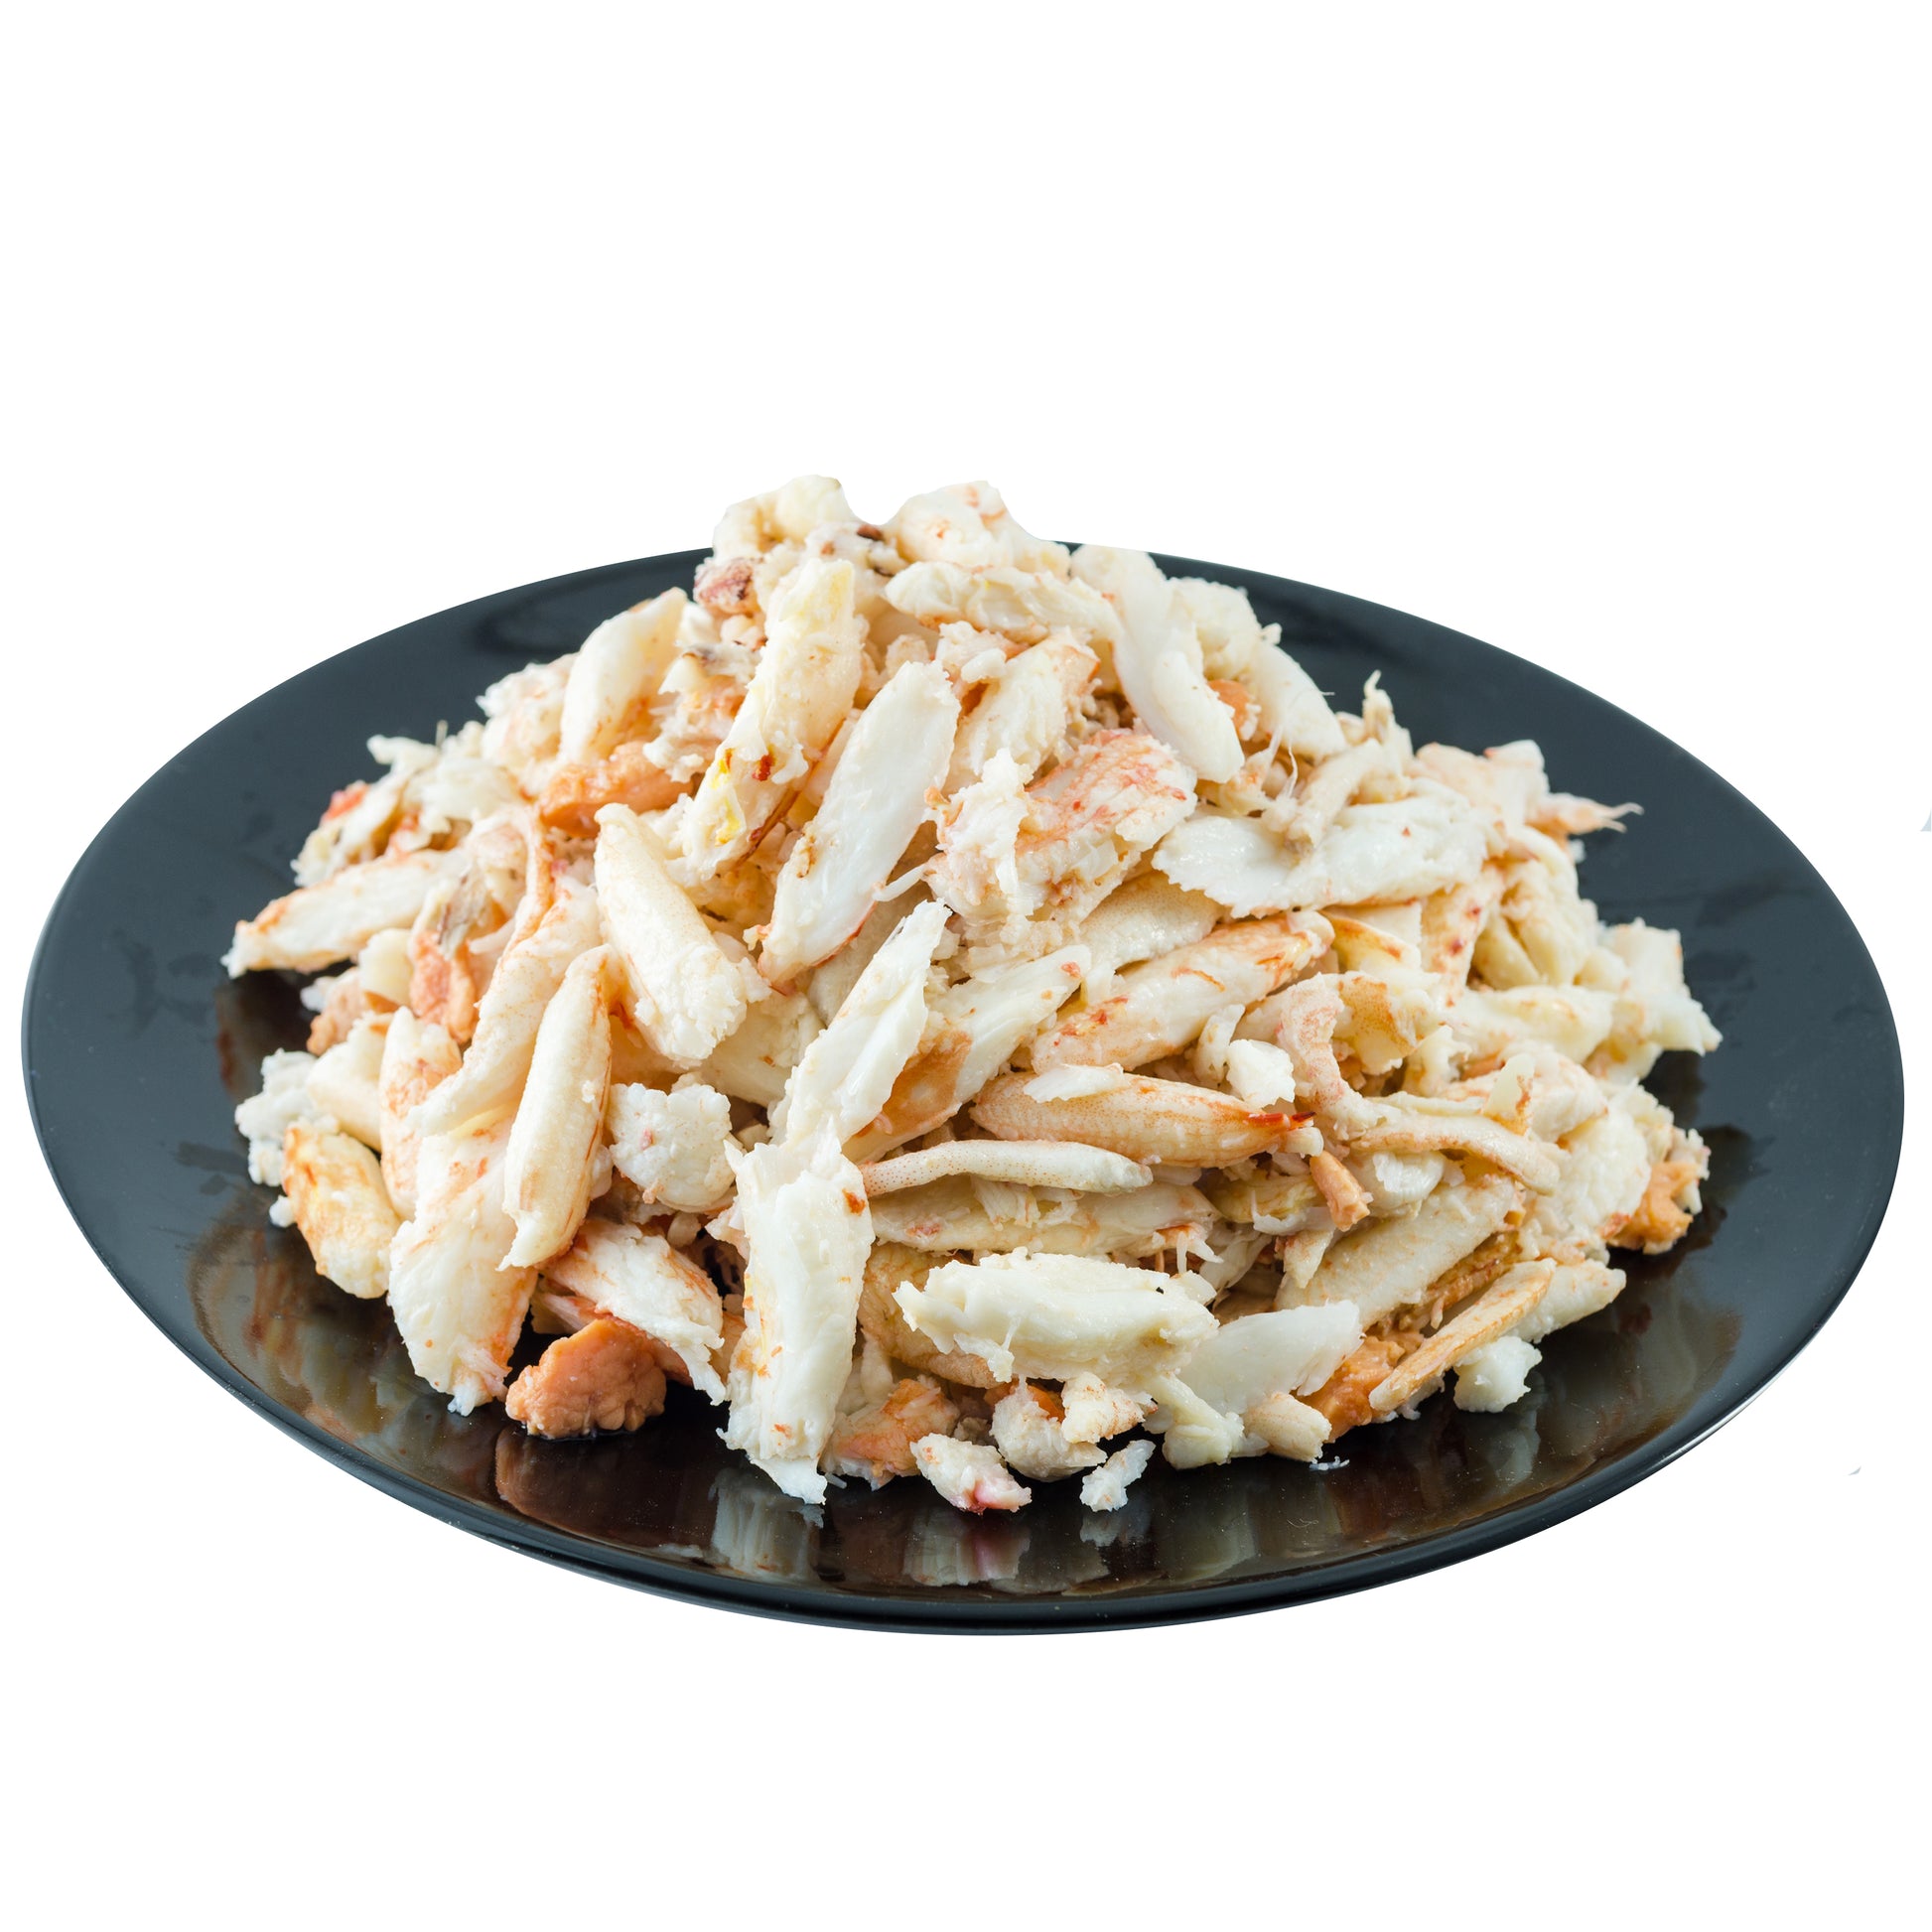 Backfin Crab Meat 16 oz can